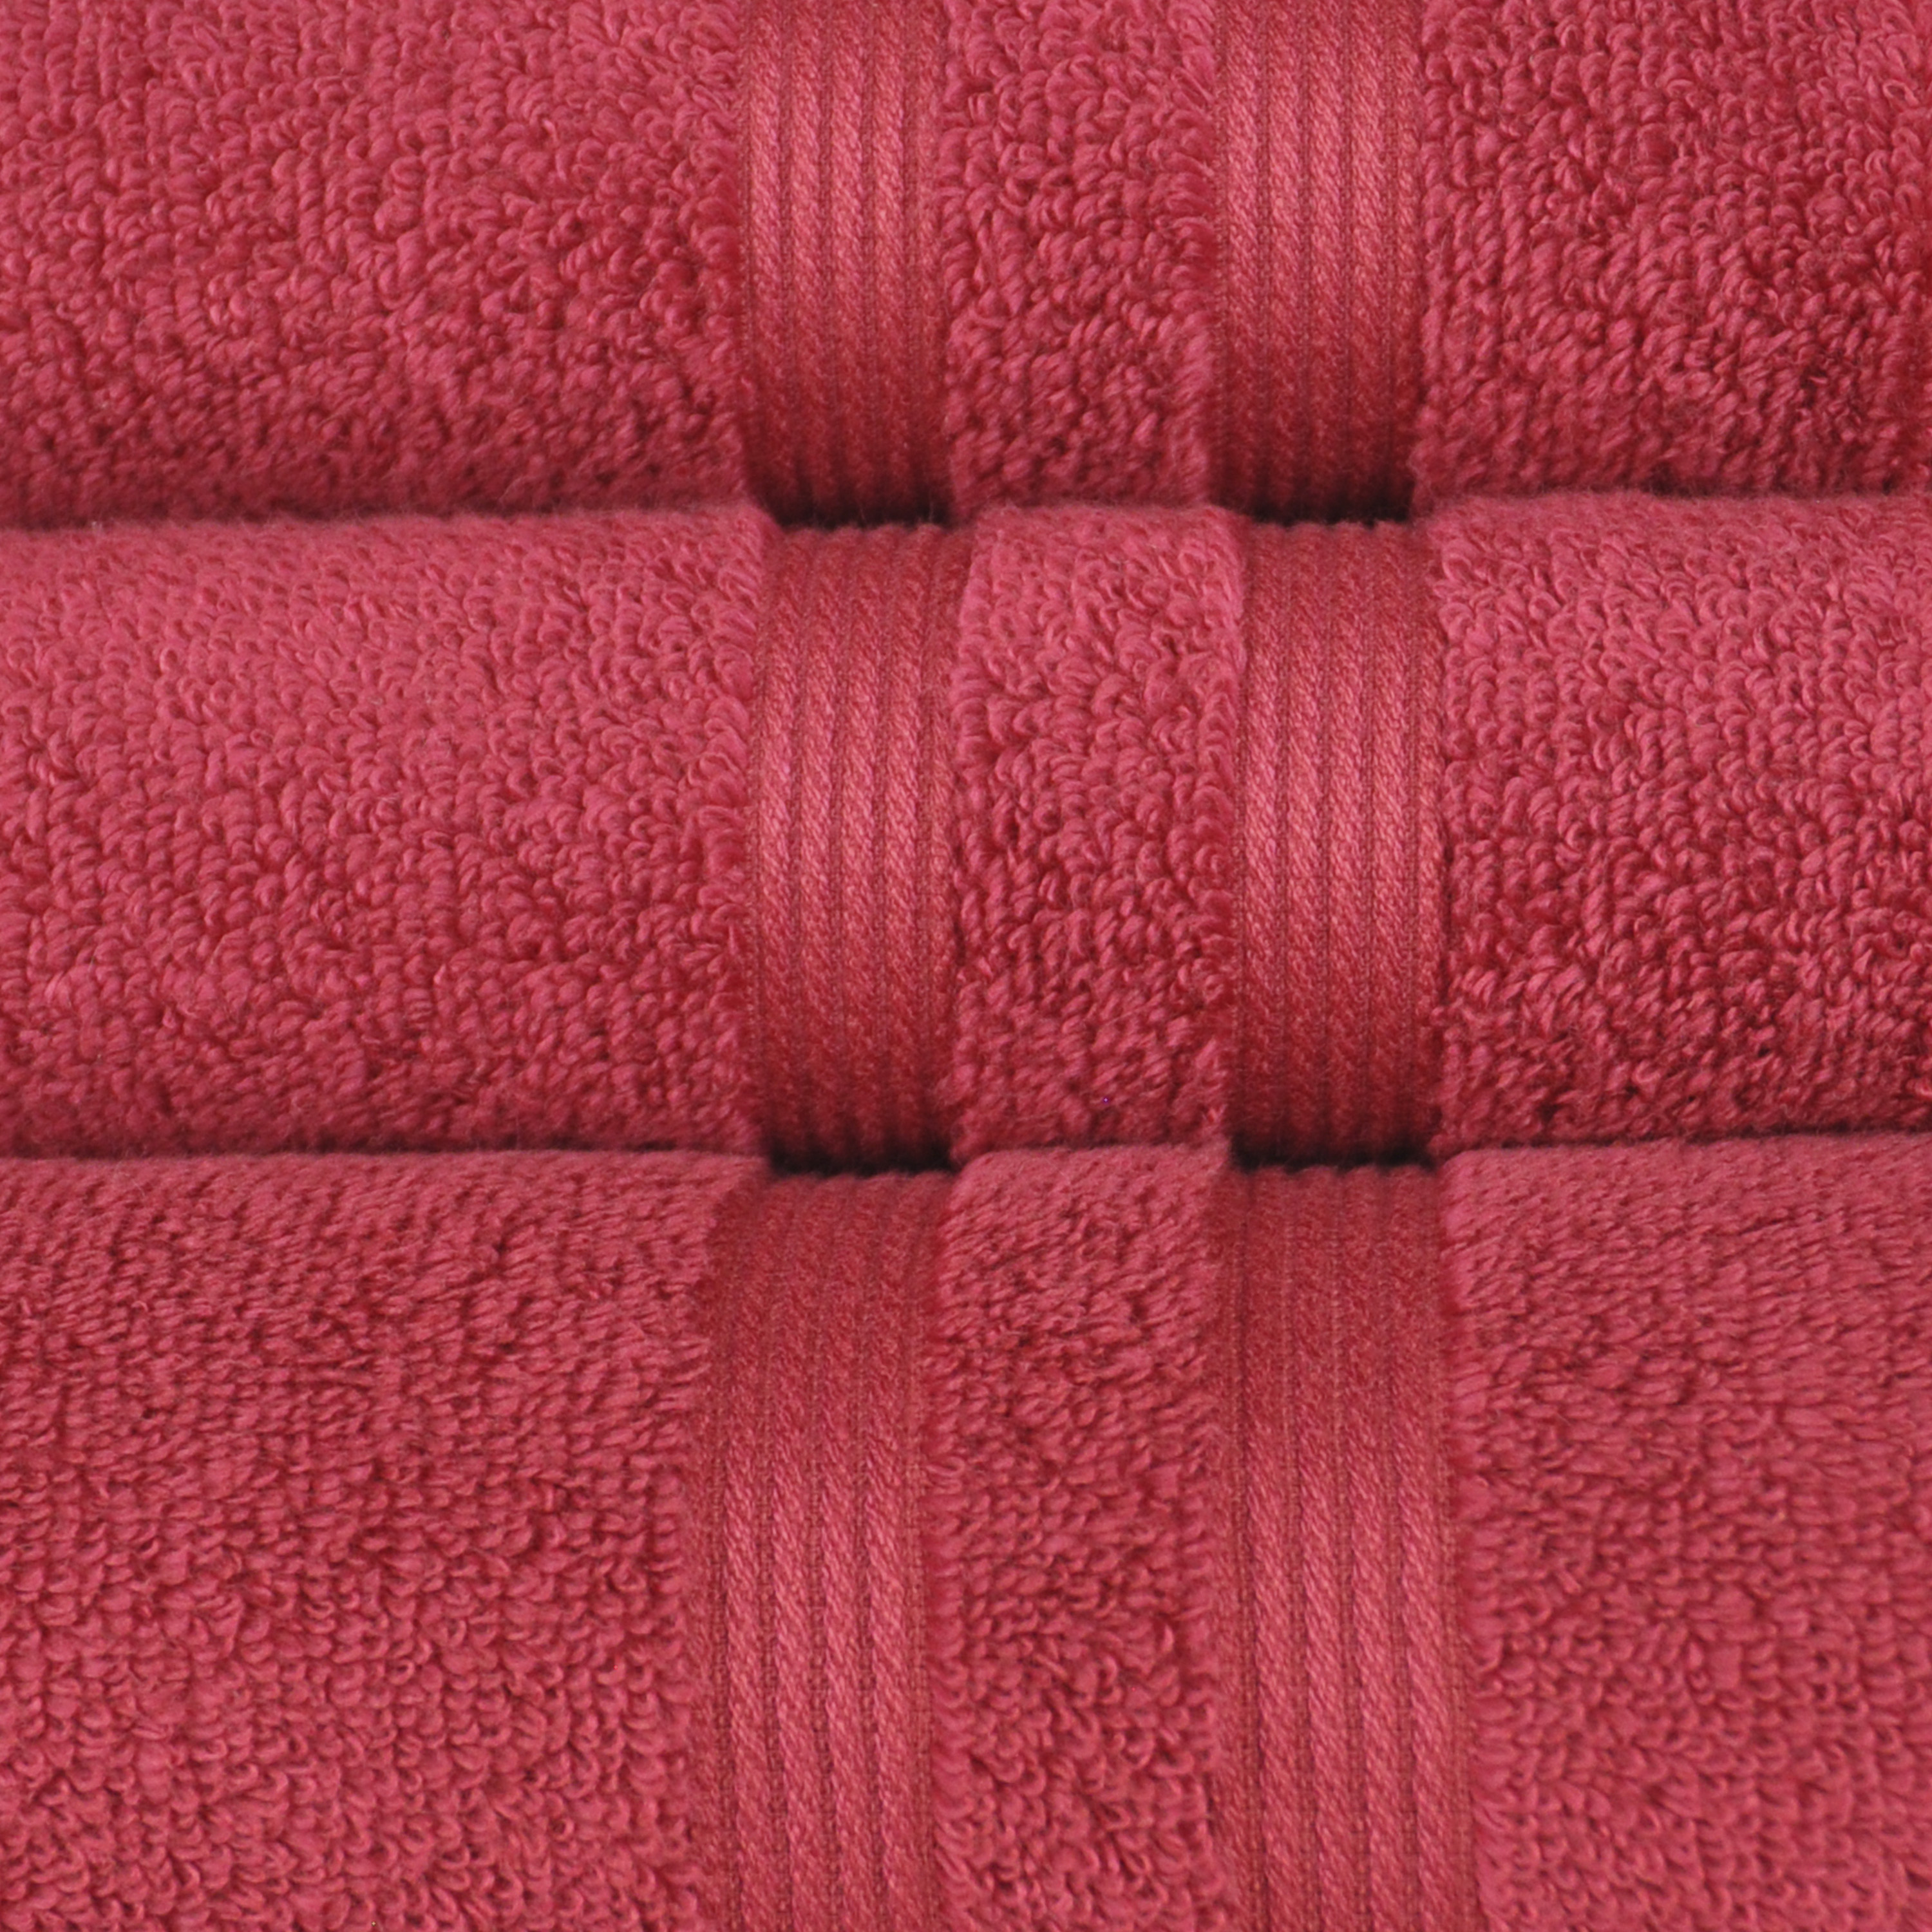 Mainstays Performance Solid 6 Piece Towel Set, Red - image 5 of 7